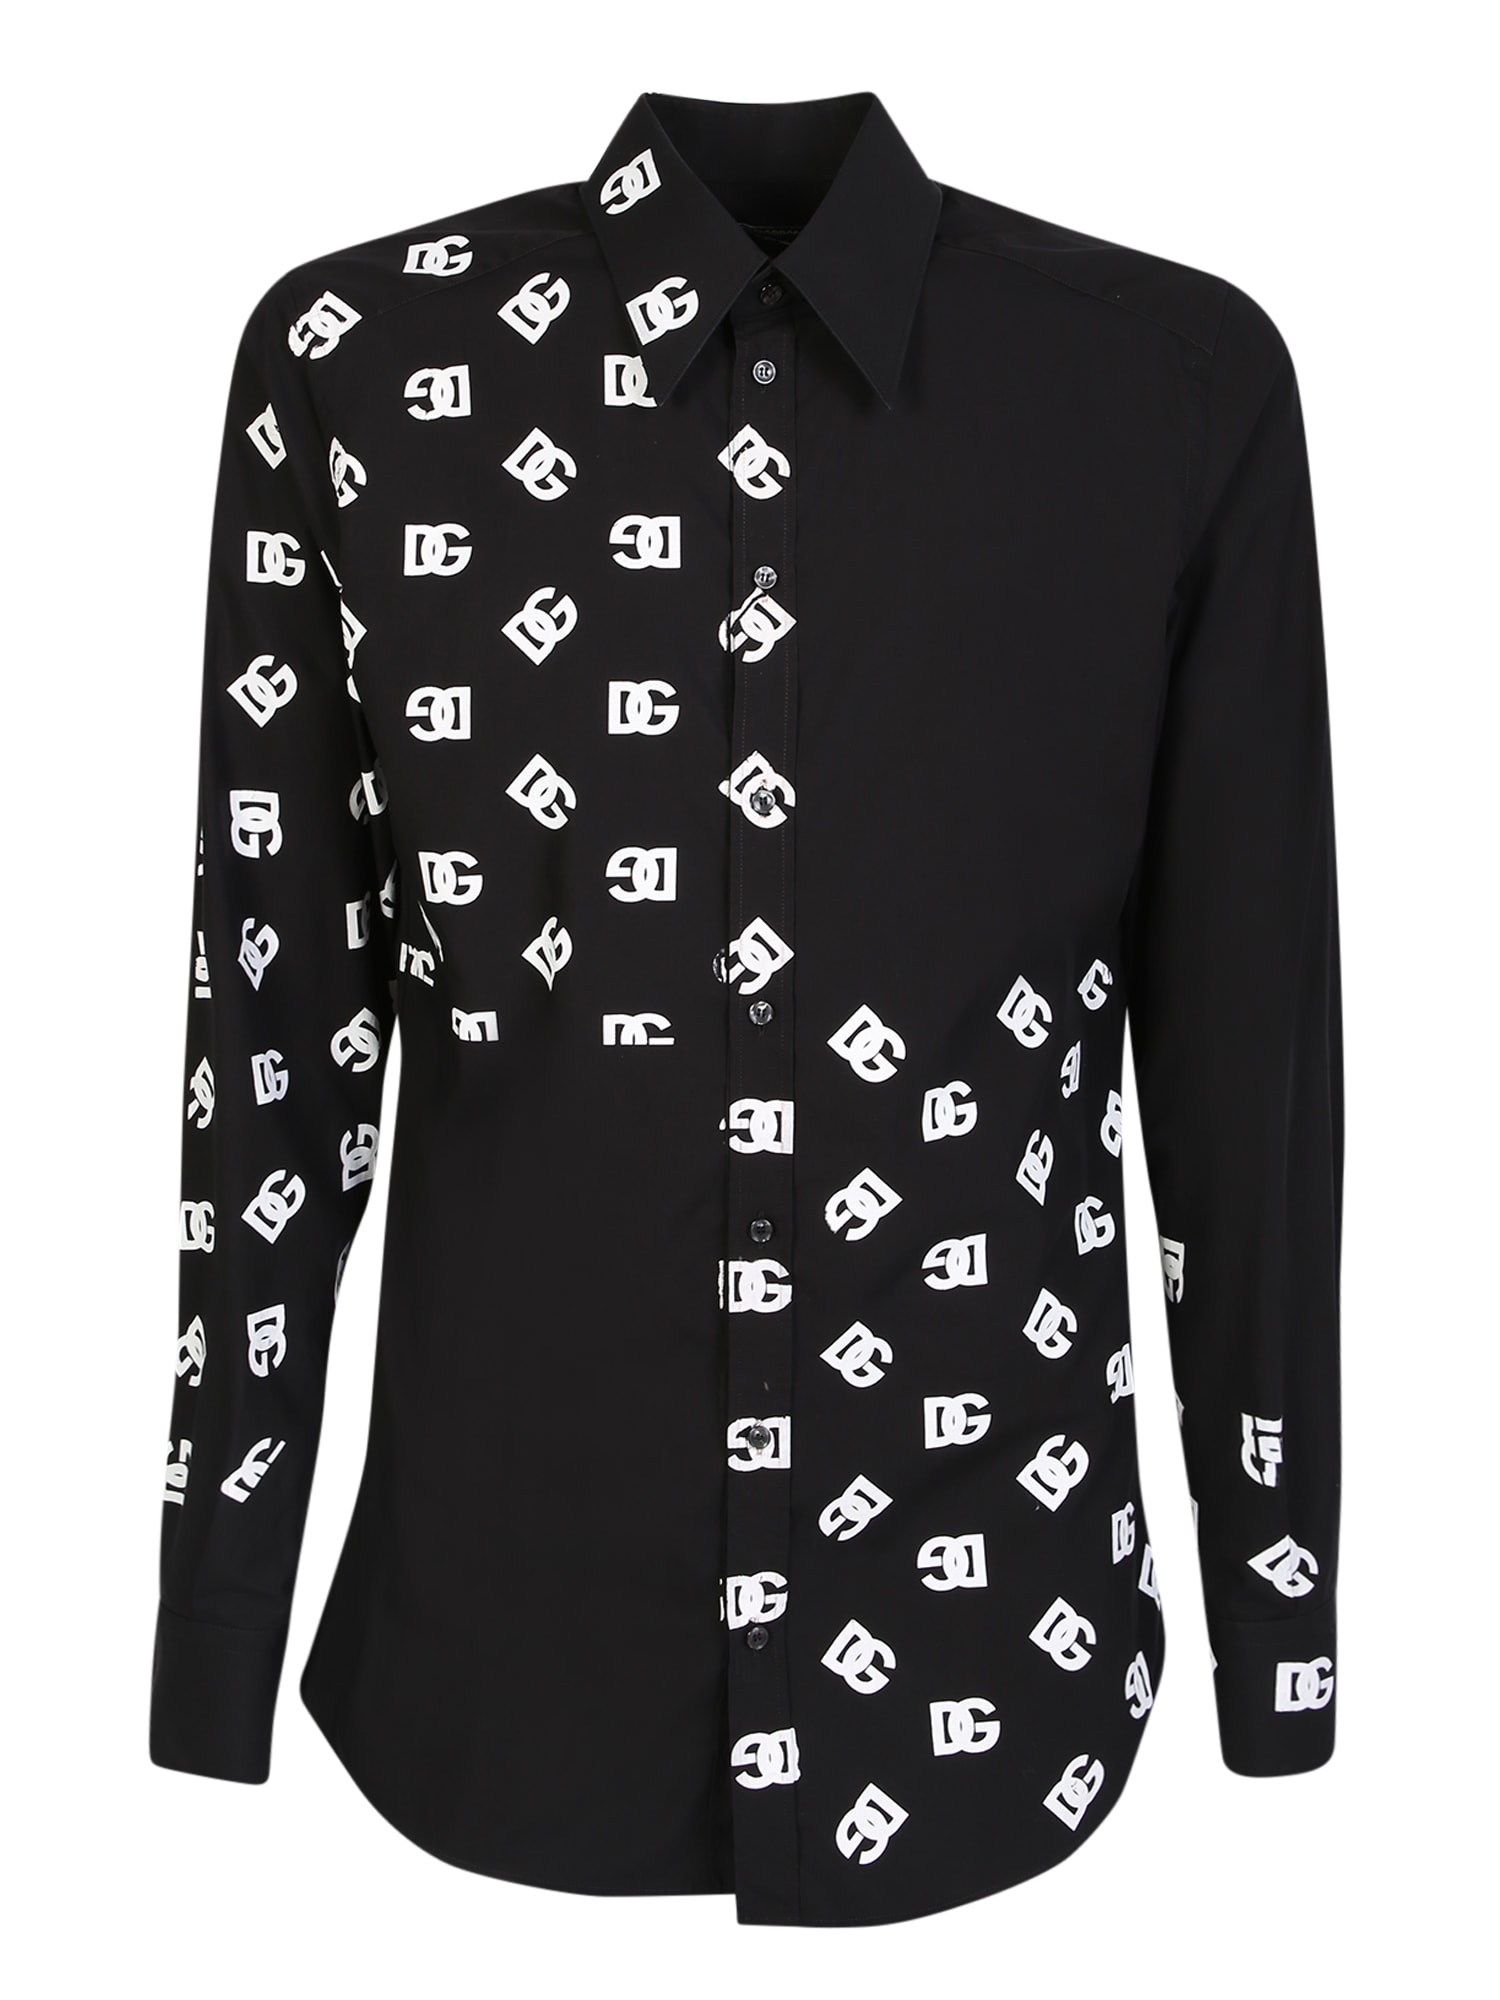 Dolce & Gabbana Logo Shirt. Exclusive Garment Thanks To Its Unmistakable Design